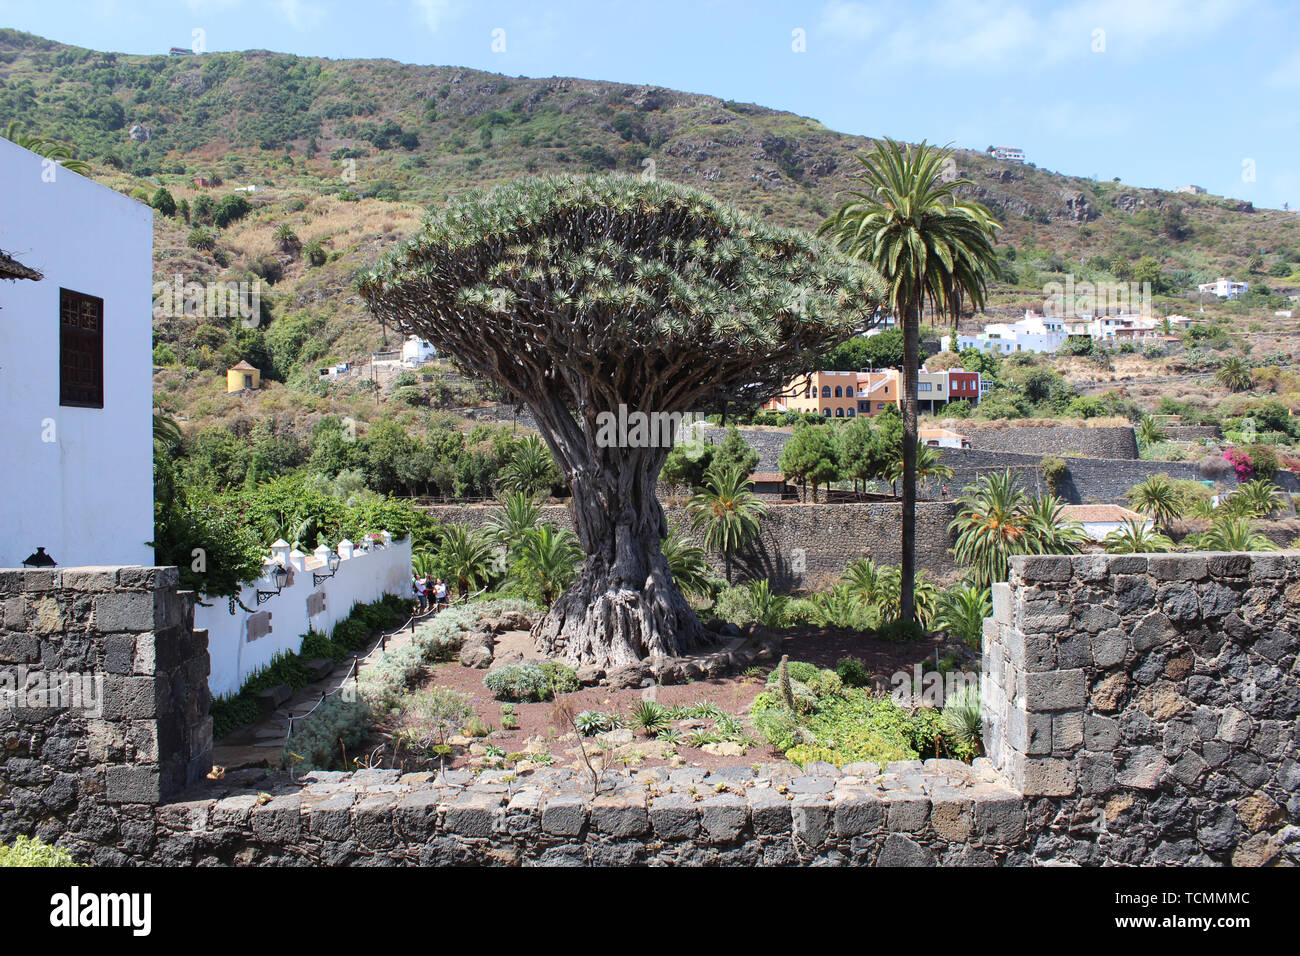 Millennial Dragon Tree (Drago Milenario) of Icod de los Vinos, the largest and the oldest living Dracaena Draco in the world and the symbol of Tenerif Stock Photo